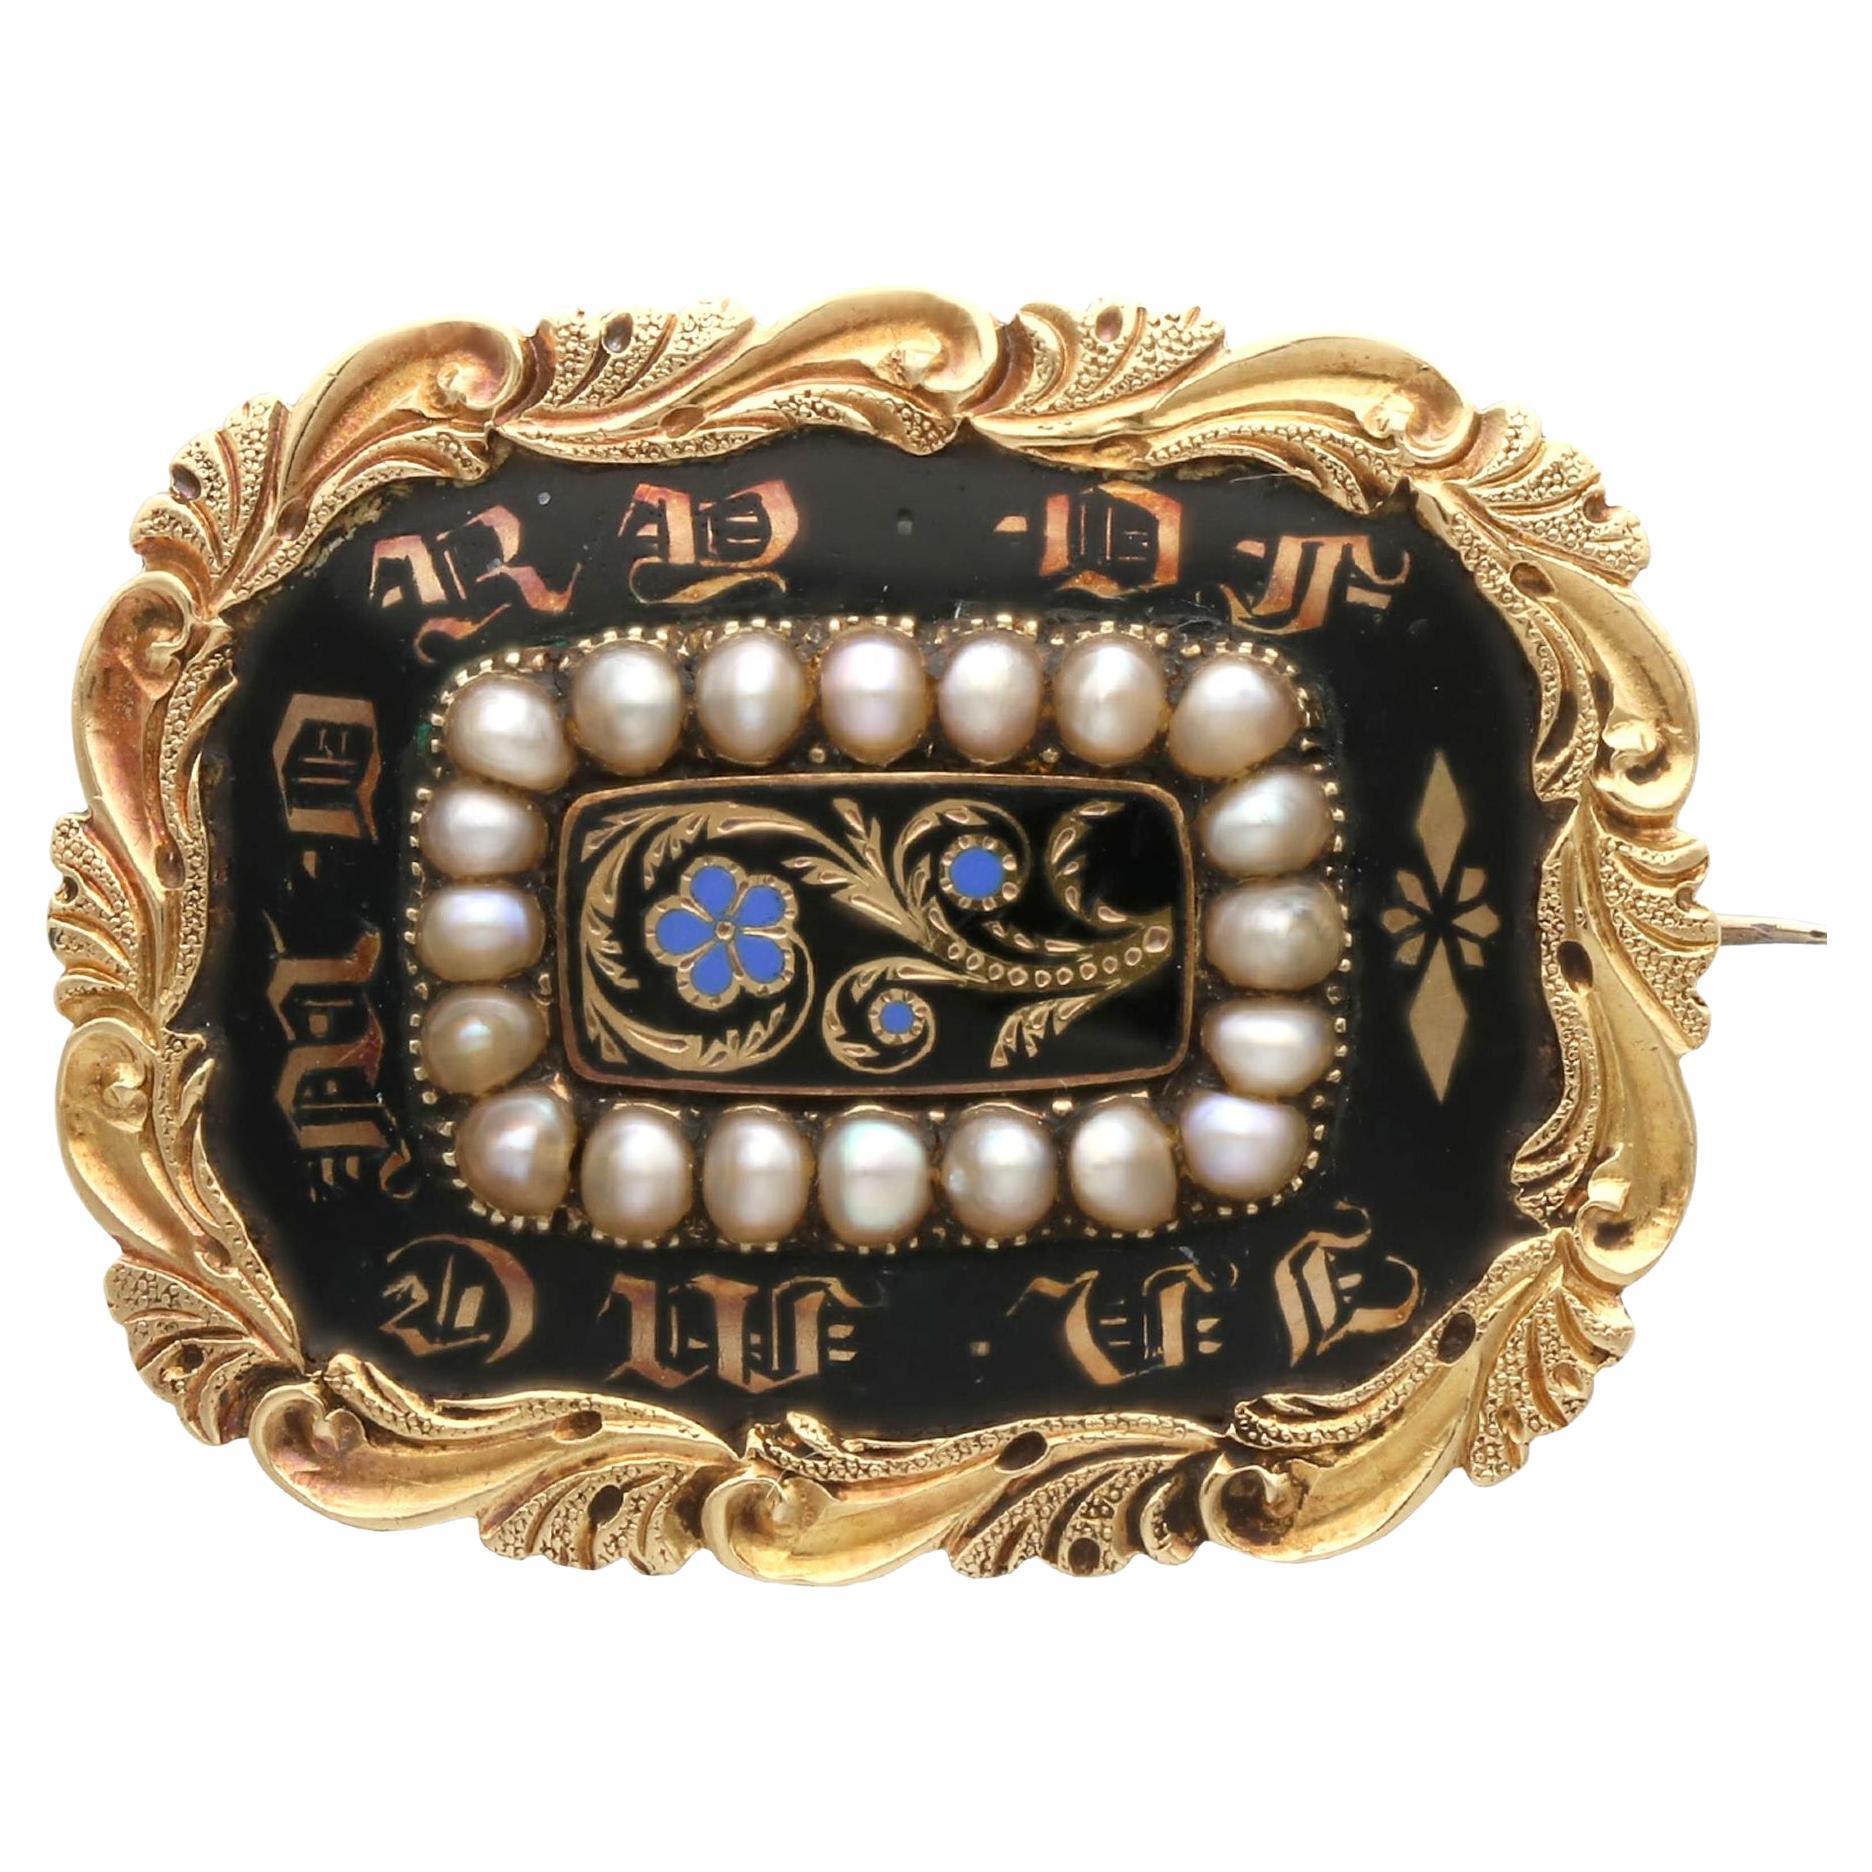 Antique Enamel and Seed Pearl 12k Yellow Gold Mourning Brooch, circa 1835